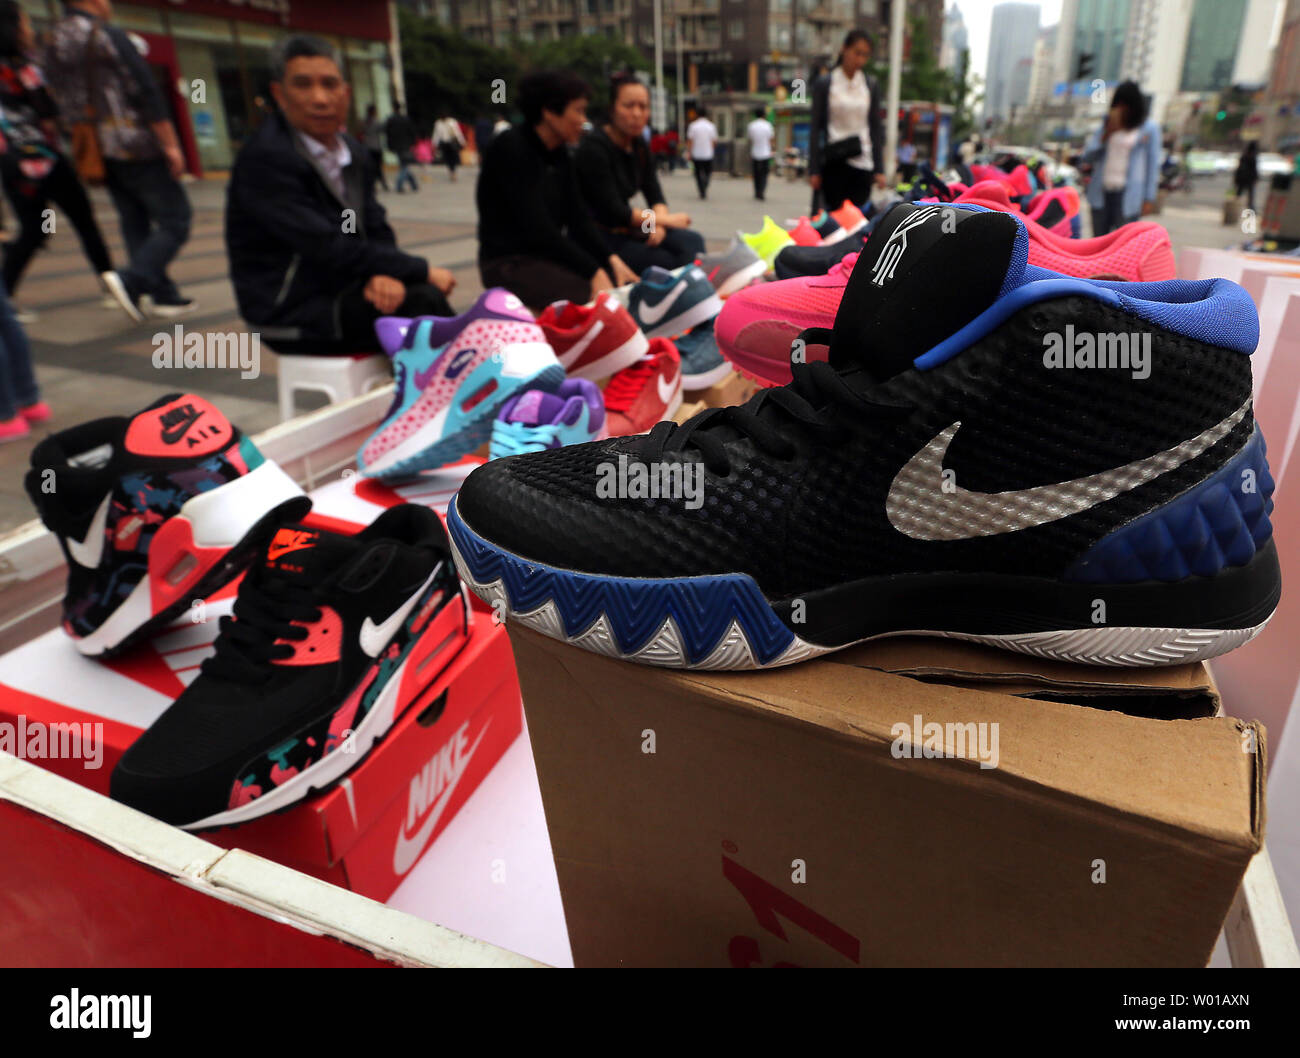 Knock-off Nike and New Balance athletic shoes are sold outside a shopping  mall in Beijing on April 15, 2016. China's government is still wrestling  with the rampant knock-off and counterfeit products manufactured